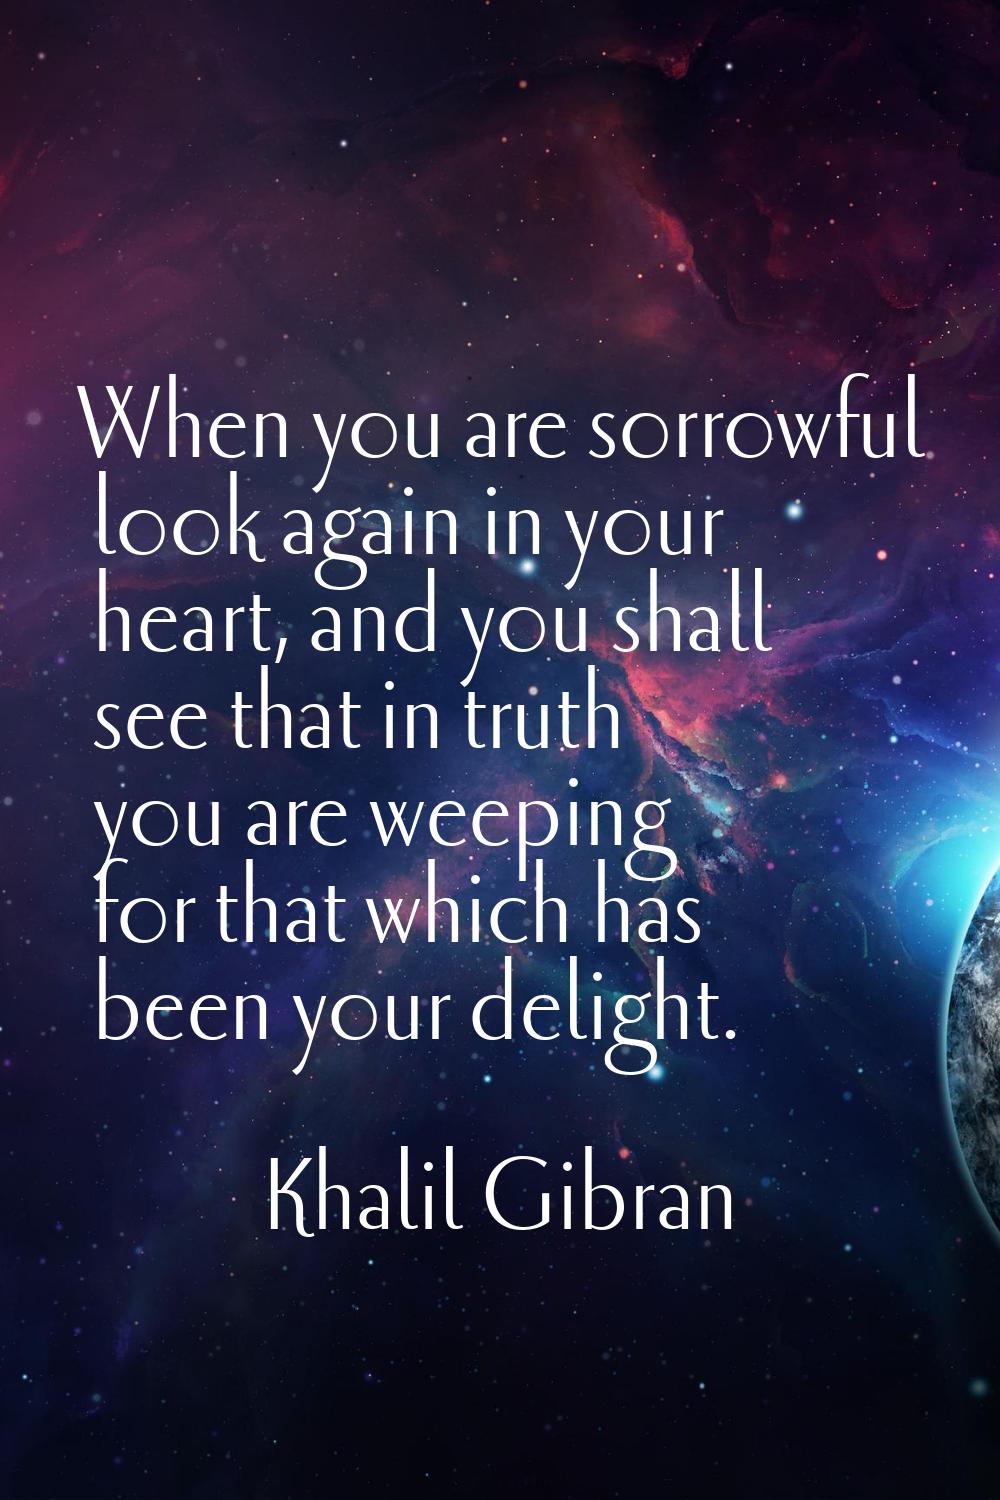 When you are sorrowful look again in your heart, and you shall see that in truth you are weeping fo